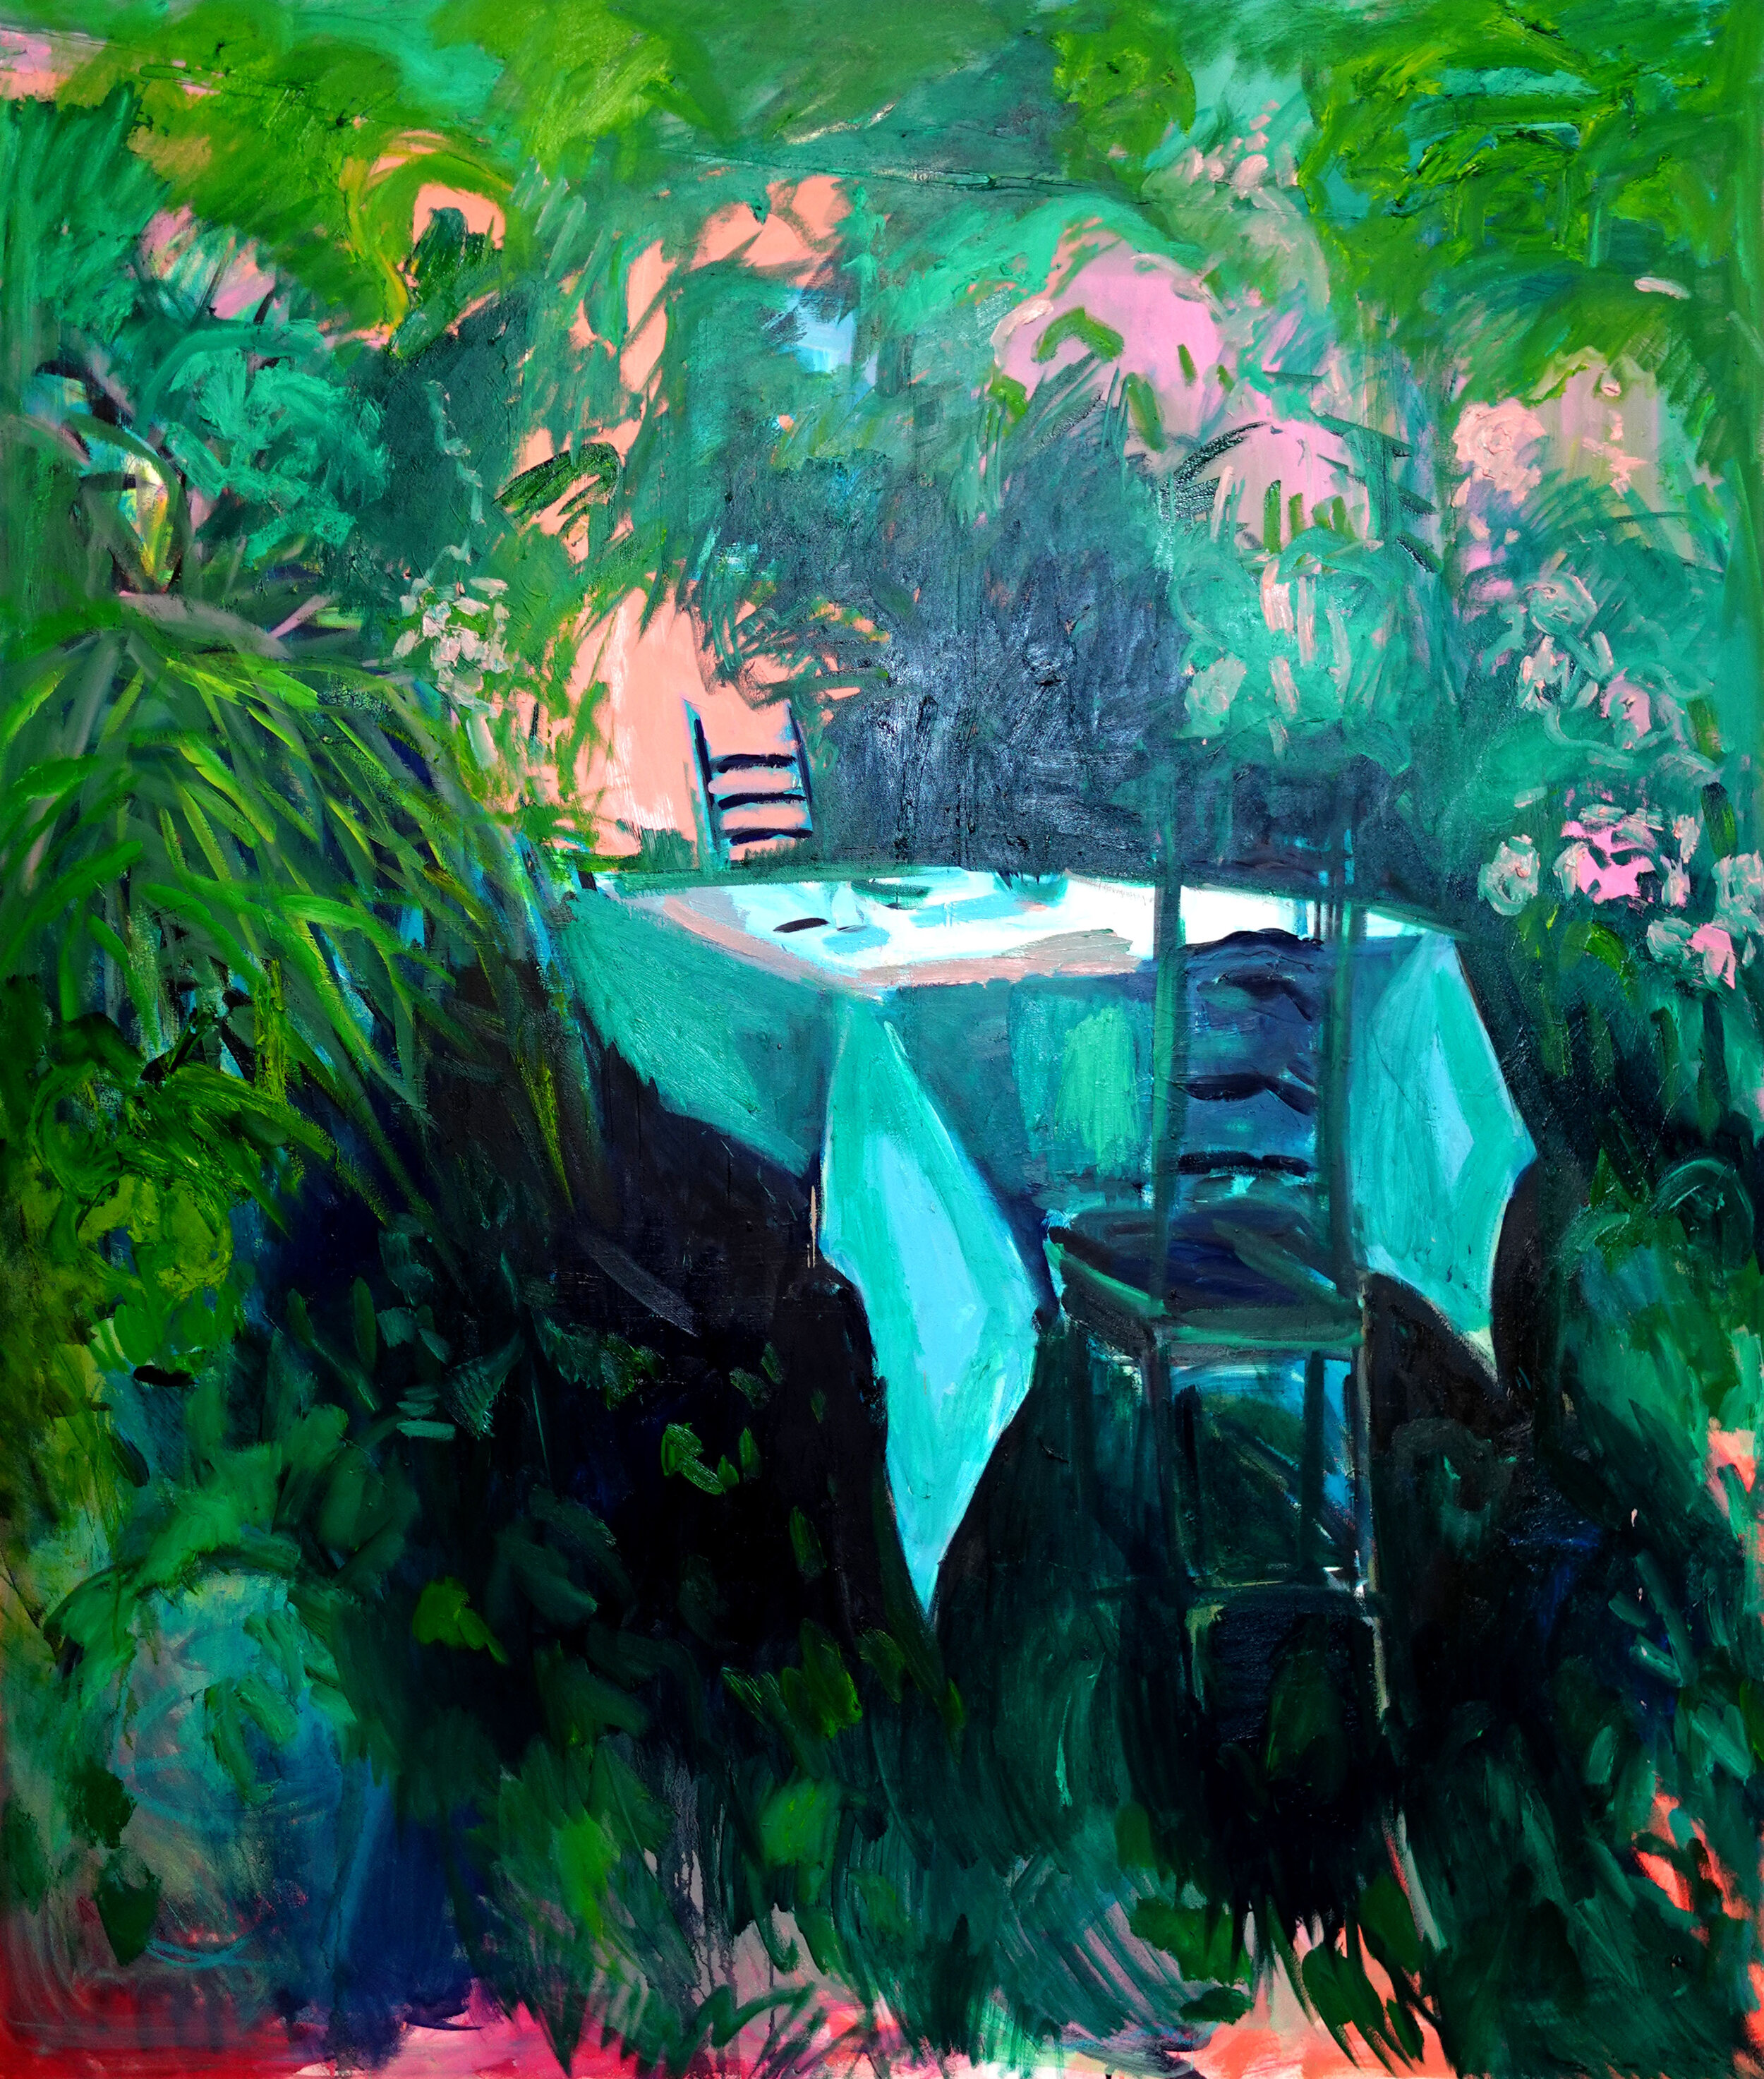 EP_A Table For Me_Oil on canvas_72x60in_2020_F1.jpg